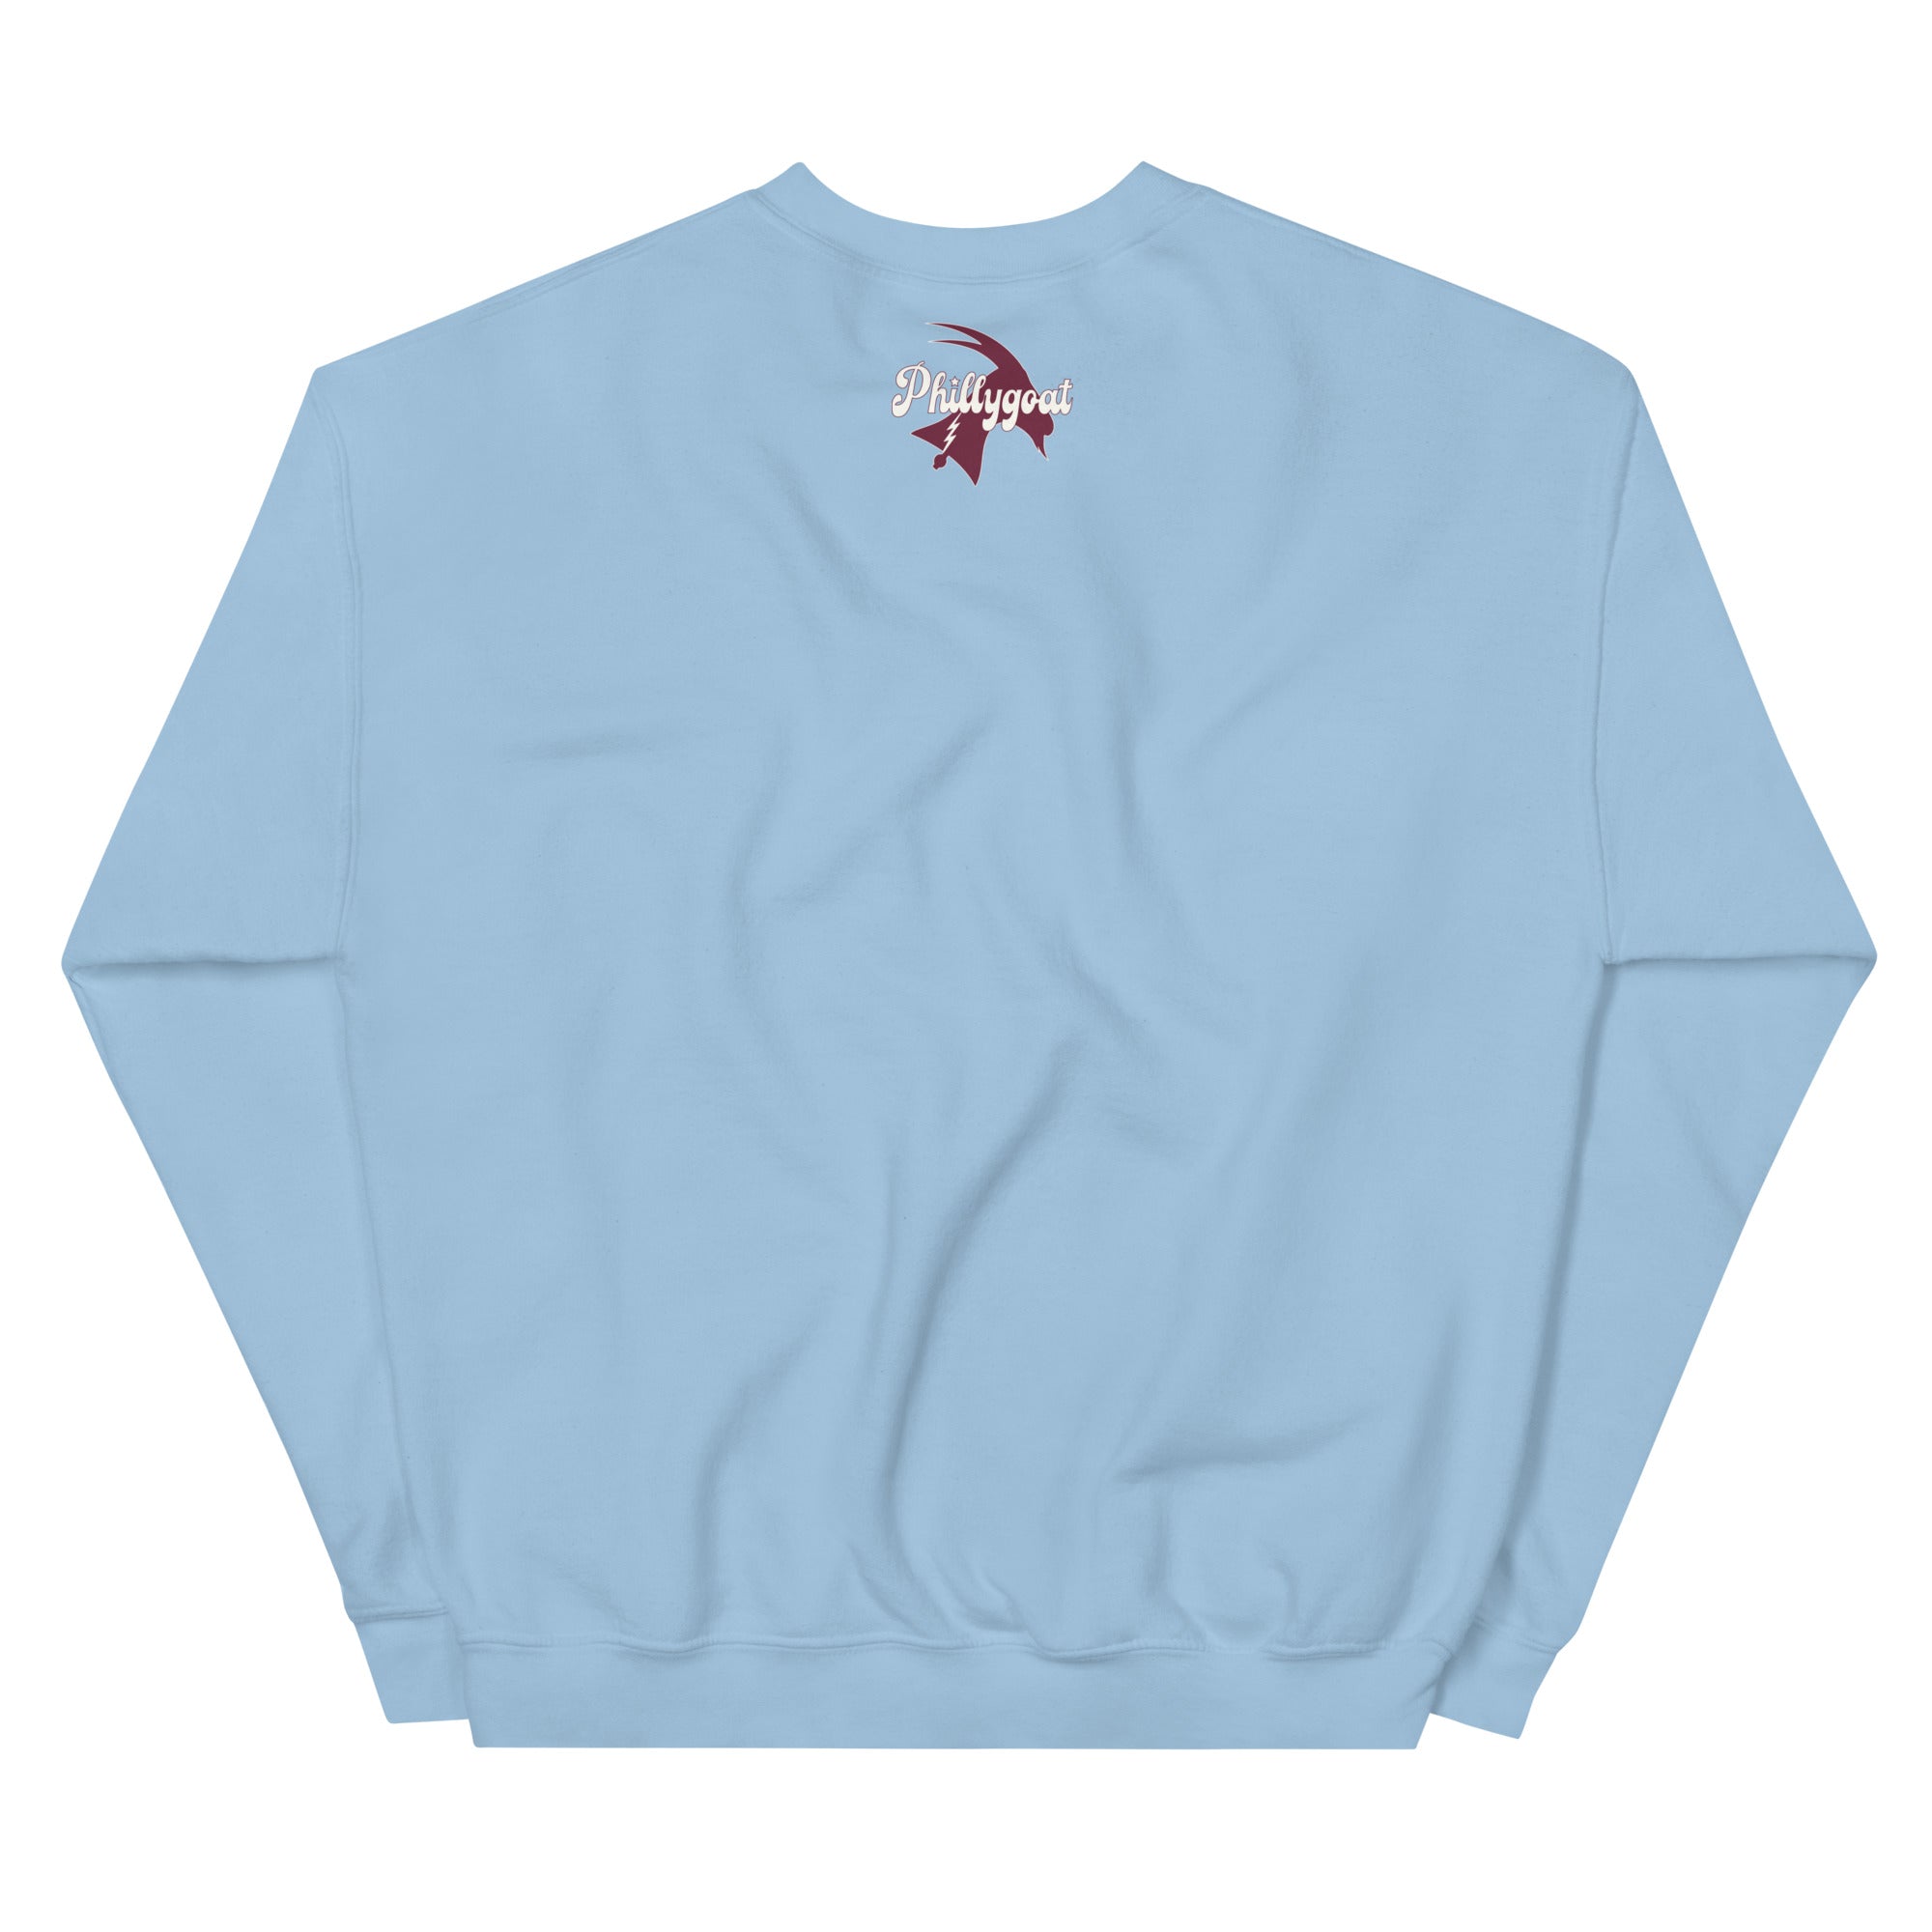 "Philly Invented Grit" Sweatshirt